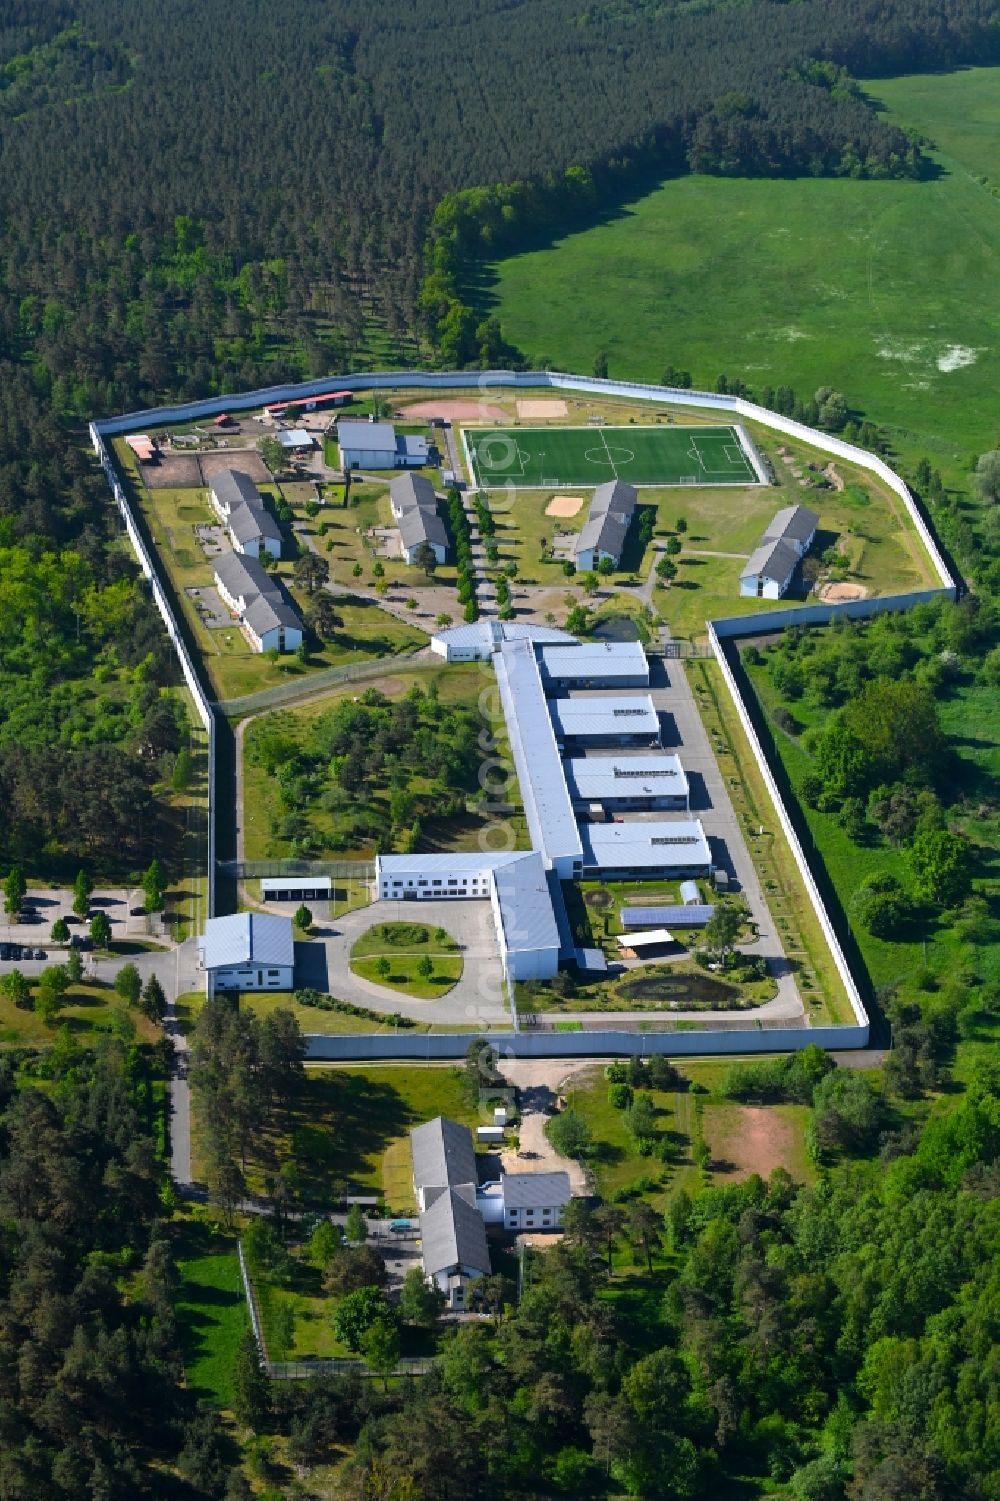 Aerial photograph Neustrelitz - Prison grounds and high security fence Prison on Kaulksee in the district Fuerstensee in Neustrelitz in the state Mecklenburg - Western Pomerania, Germany